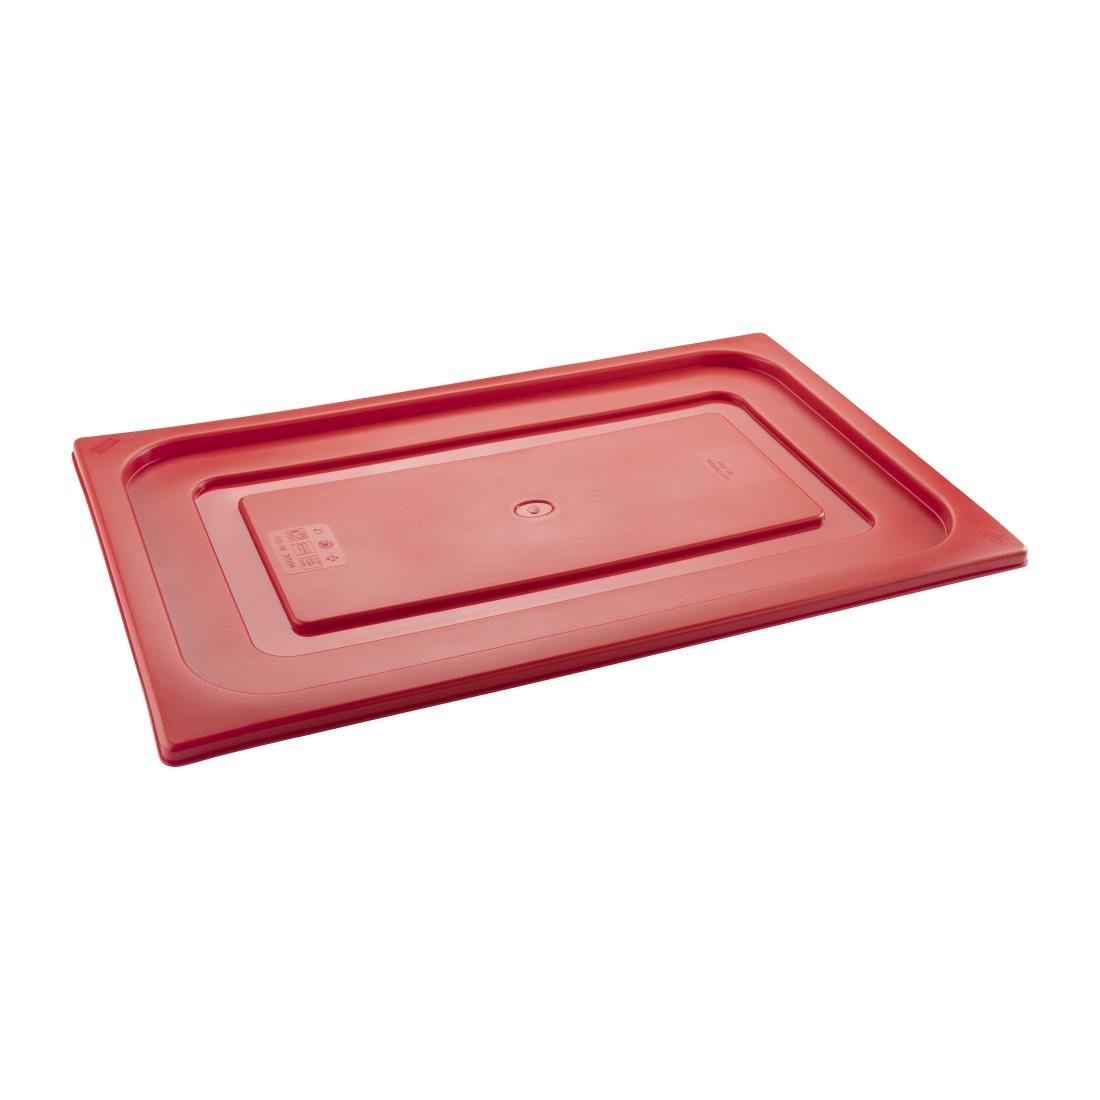 HT892 Pujadas Red Polinorm Gastronorm Lid 1/6GN